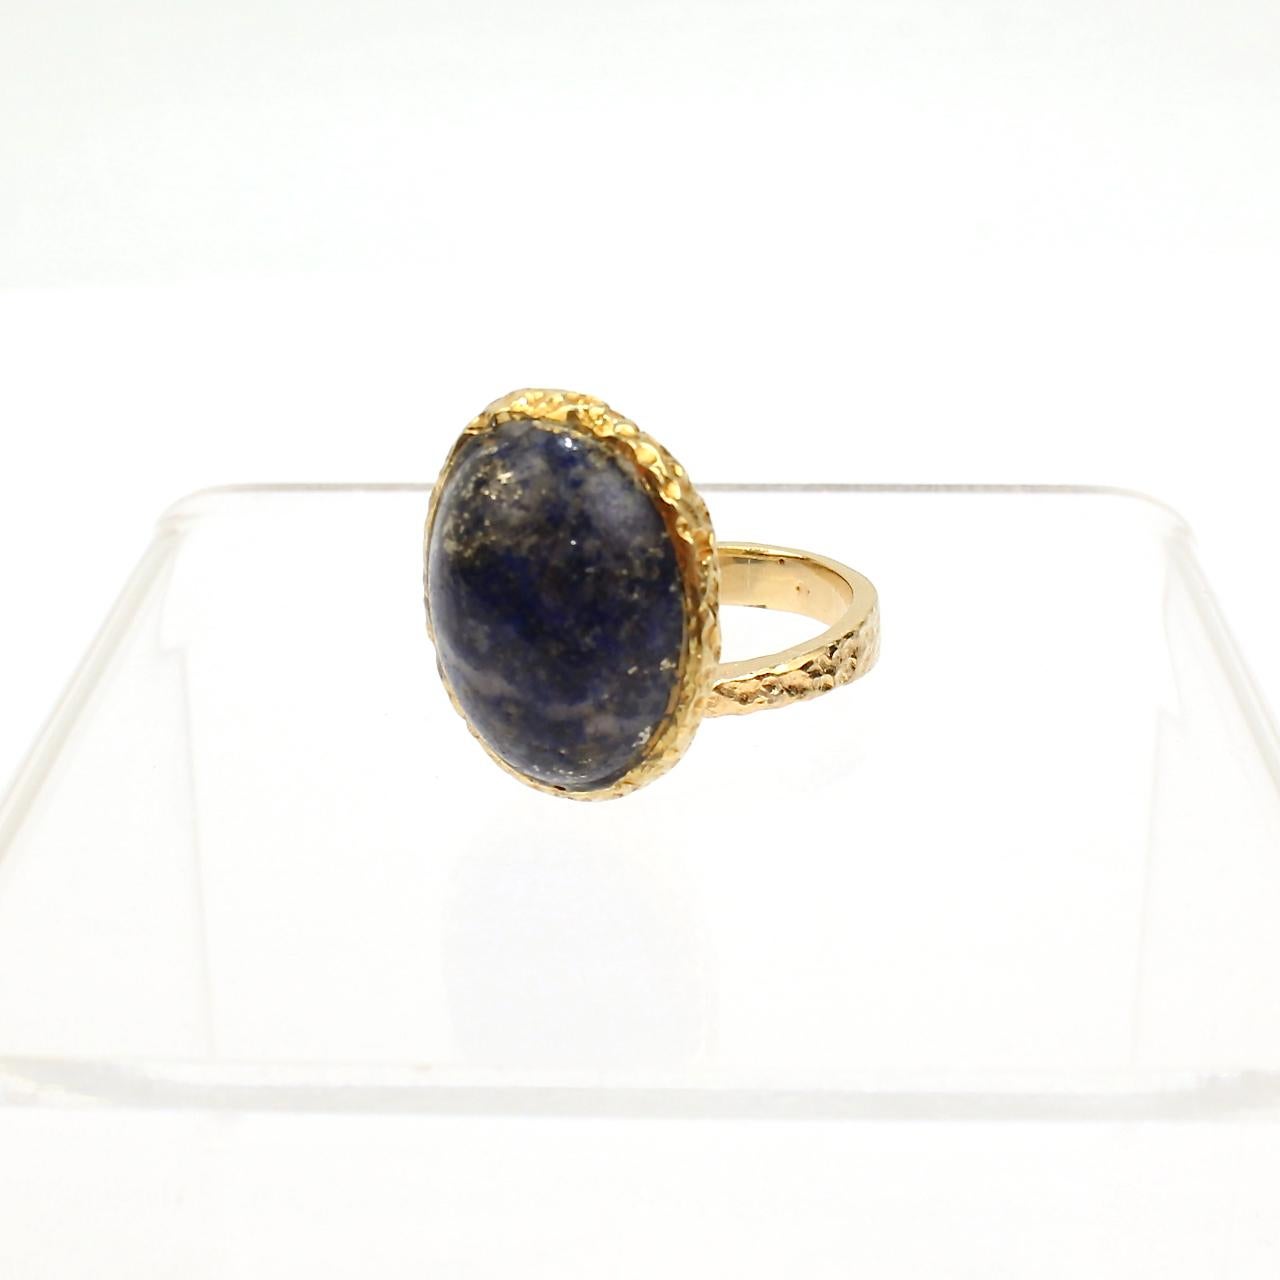 A very fine 18k gold and lapis cocktail ring by designer Erwin Pearl.

The asymmetrical ring features an oval lapis lazuli cabochon in an organic bezel setting. 

Terrific modernist design!

Date:
20th Century

Overall Condition:
It is in overall